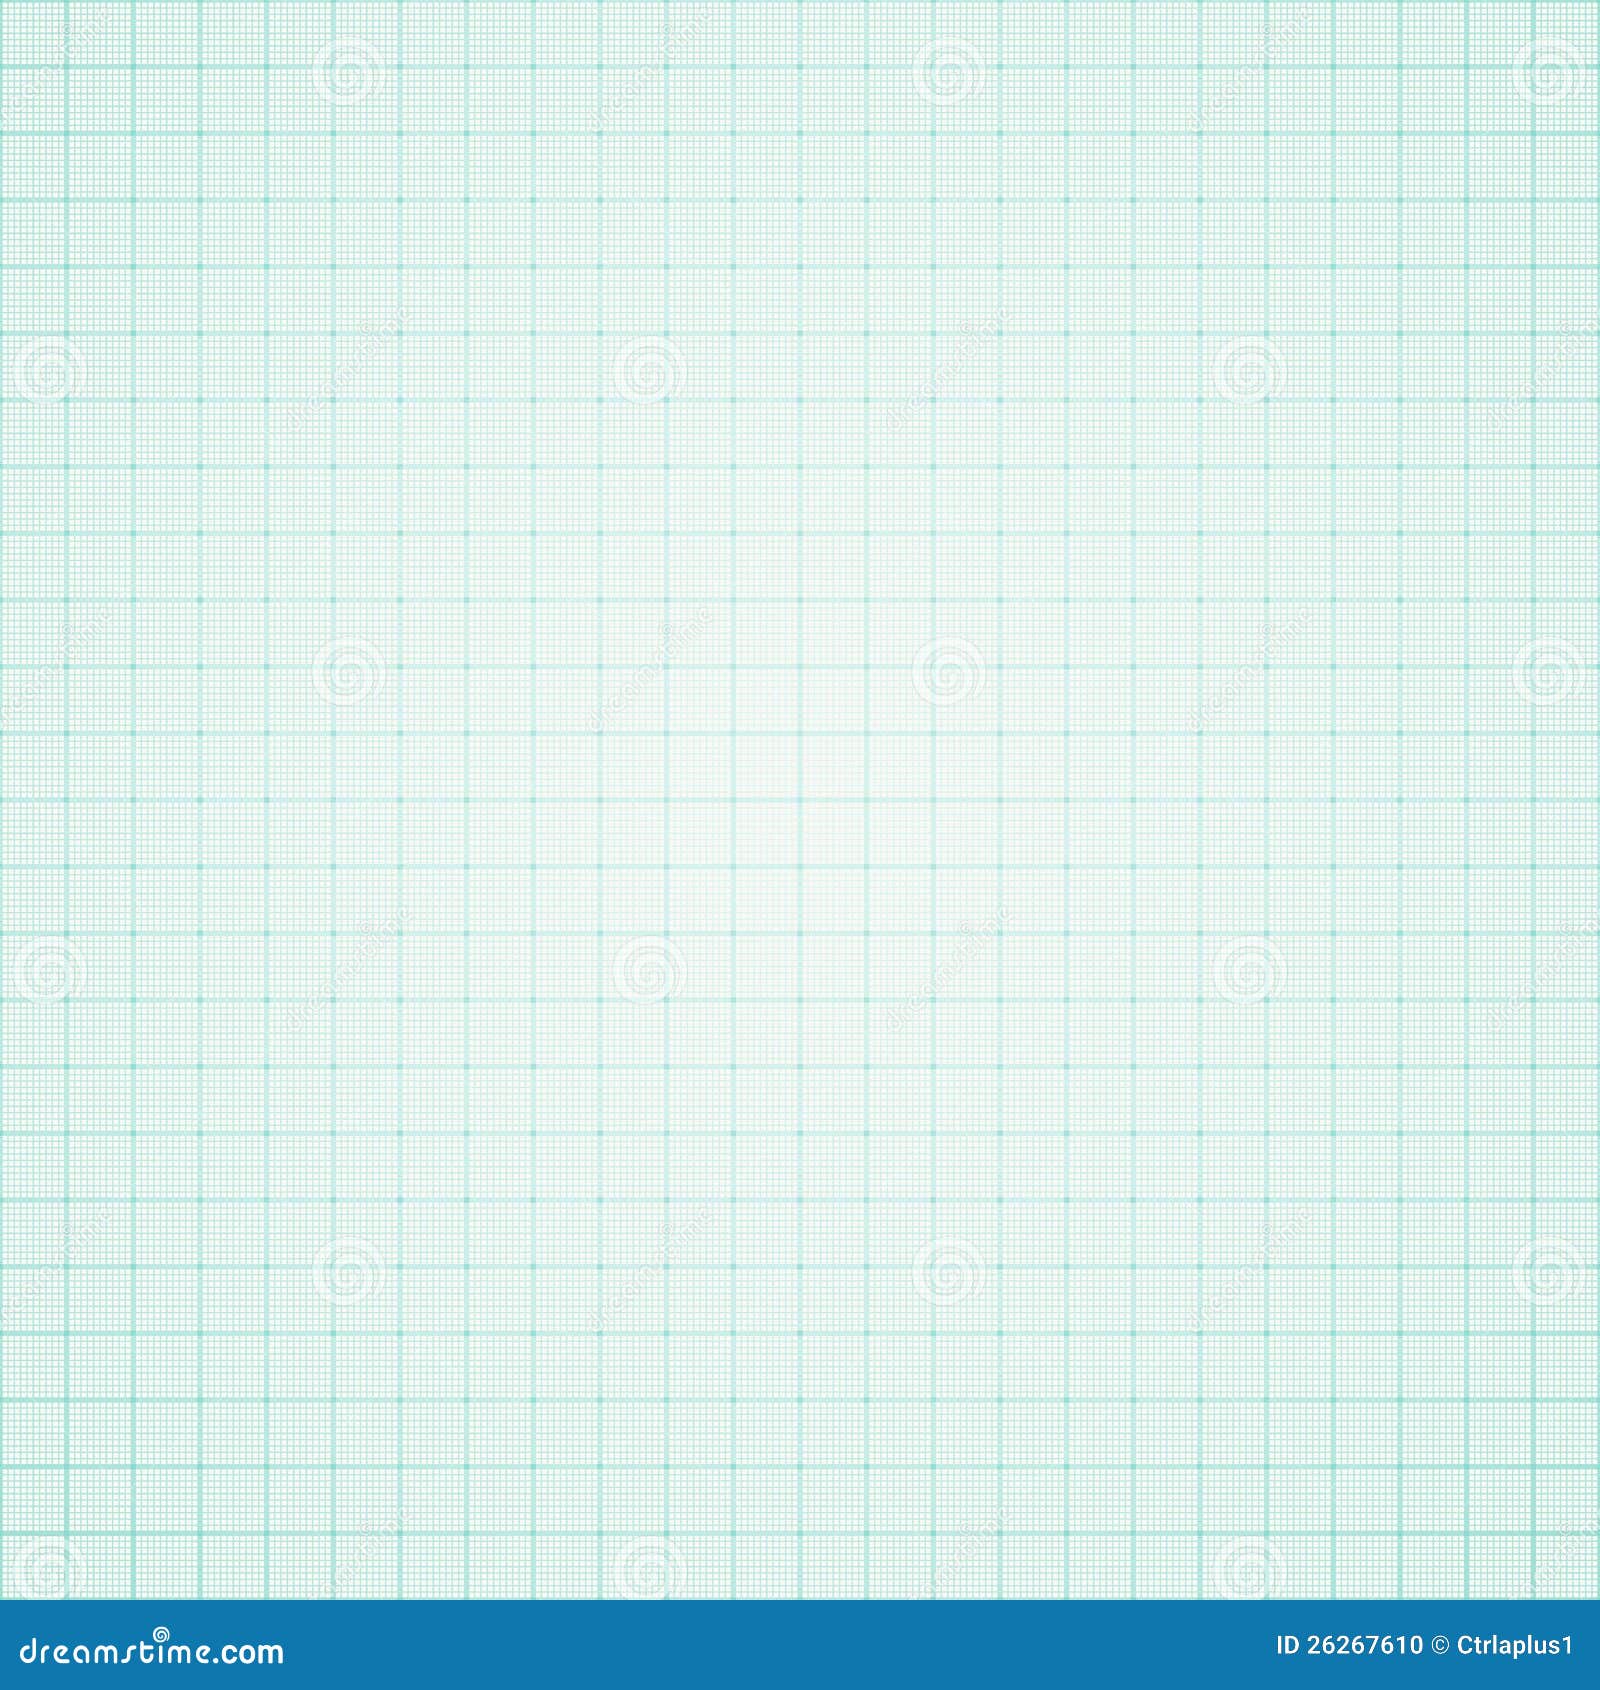 graph paper background 26267610